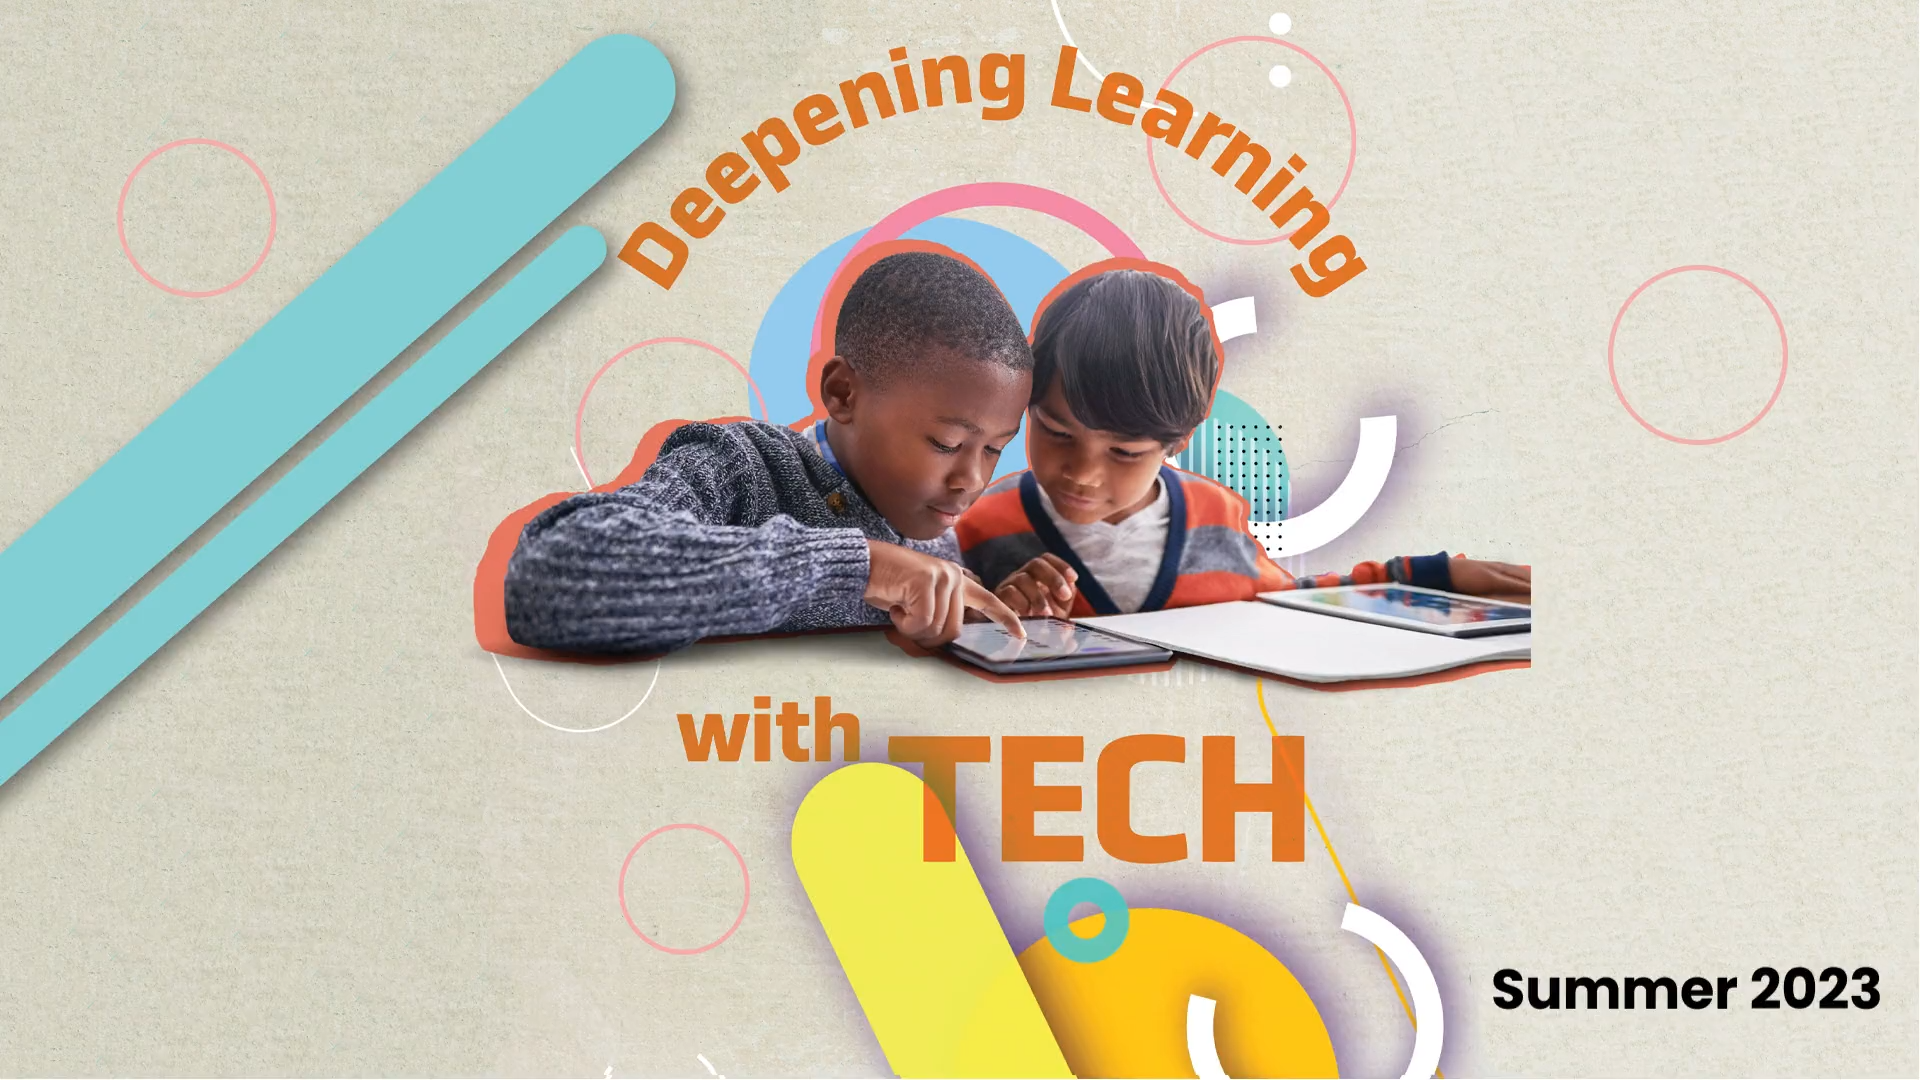 Deepening Learning with Technology / Summer 2023 Image